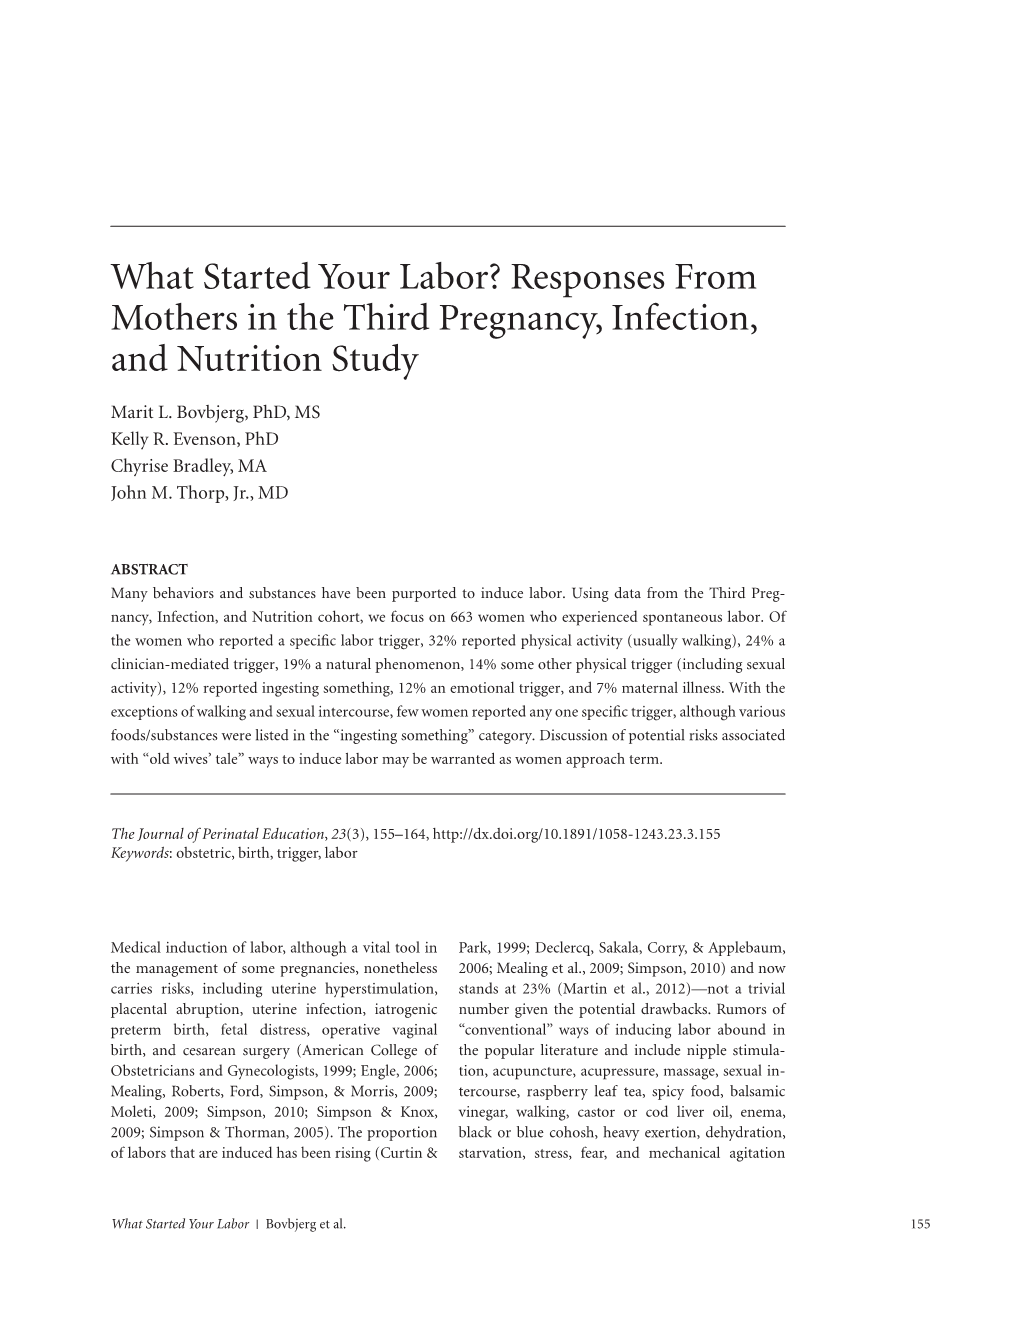 What Started Your Labor? Responses from Mothers in the Third Pregnancy, Infection, and Nutrition Study